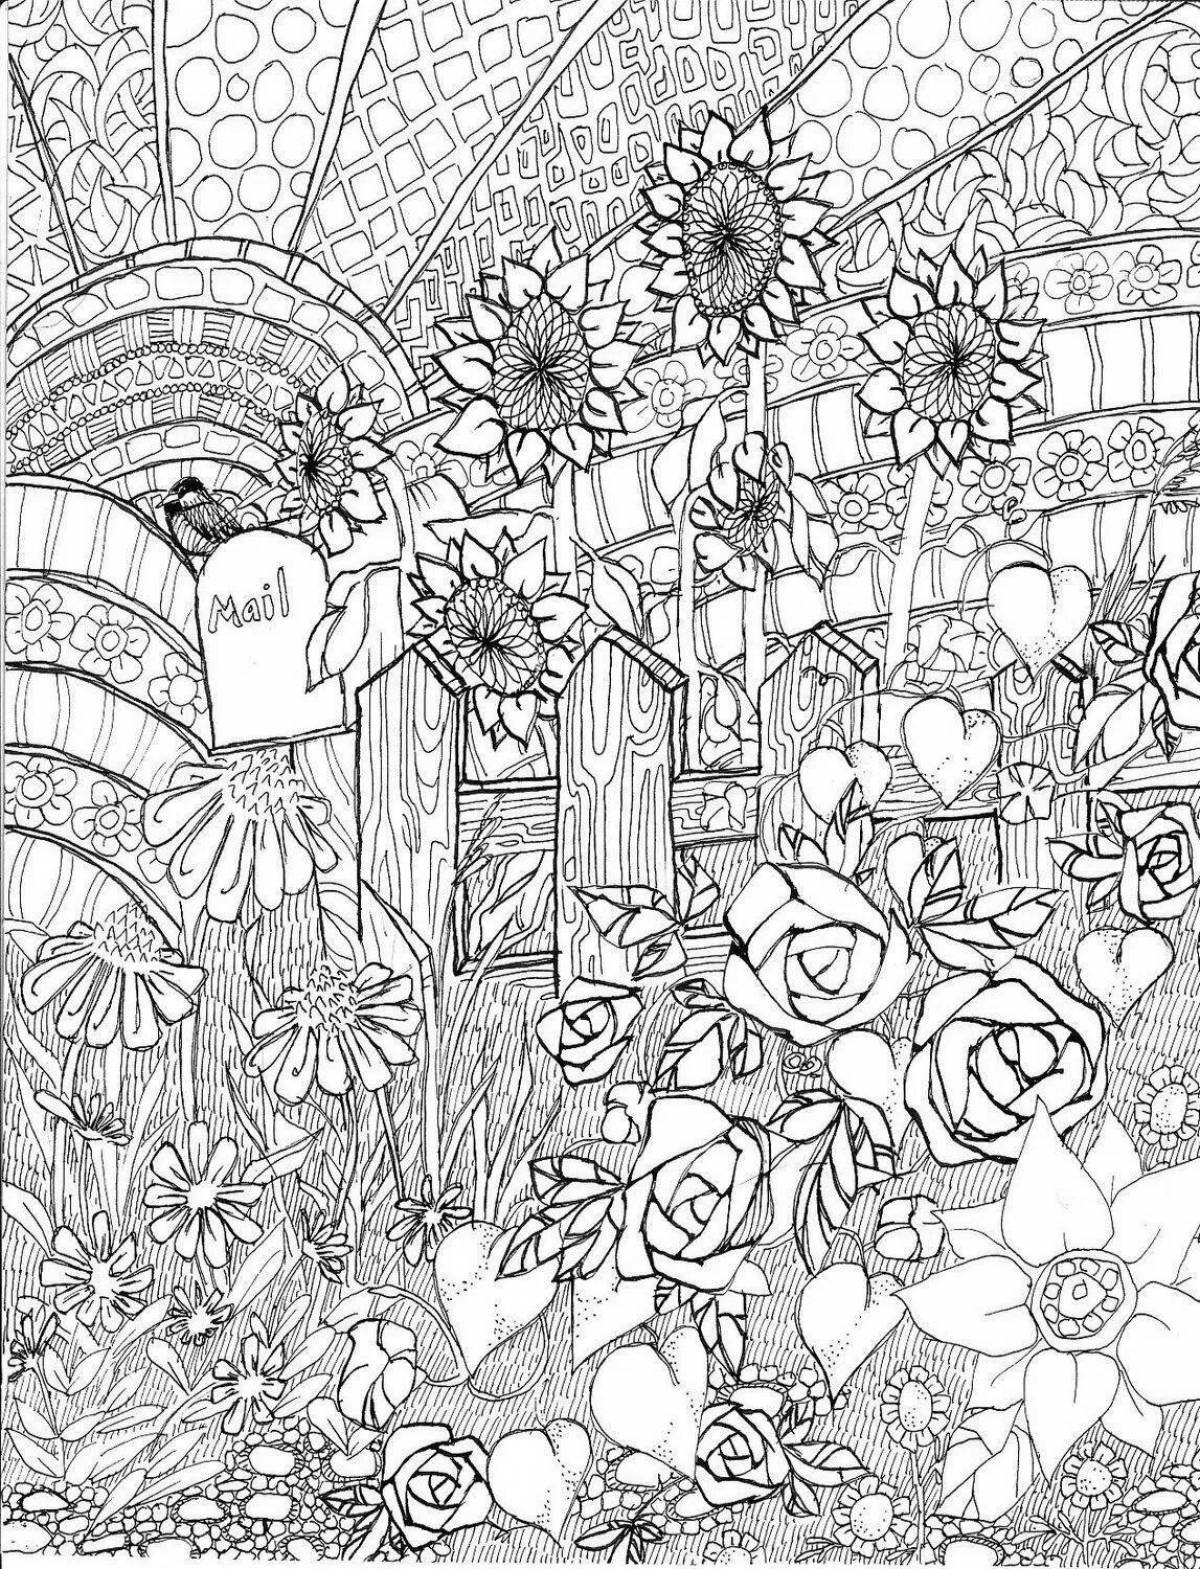 Color-frenzy coloring page